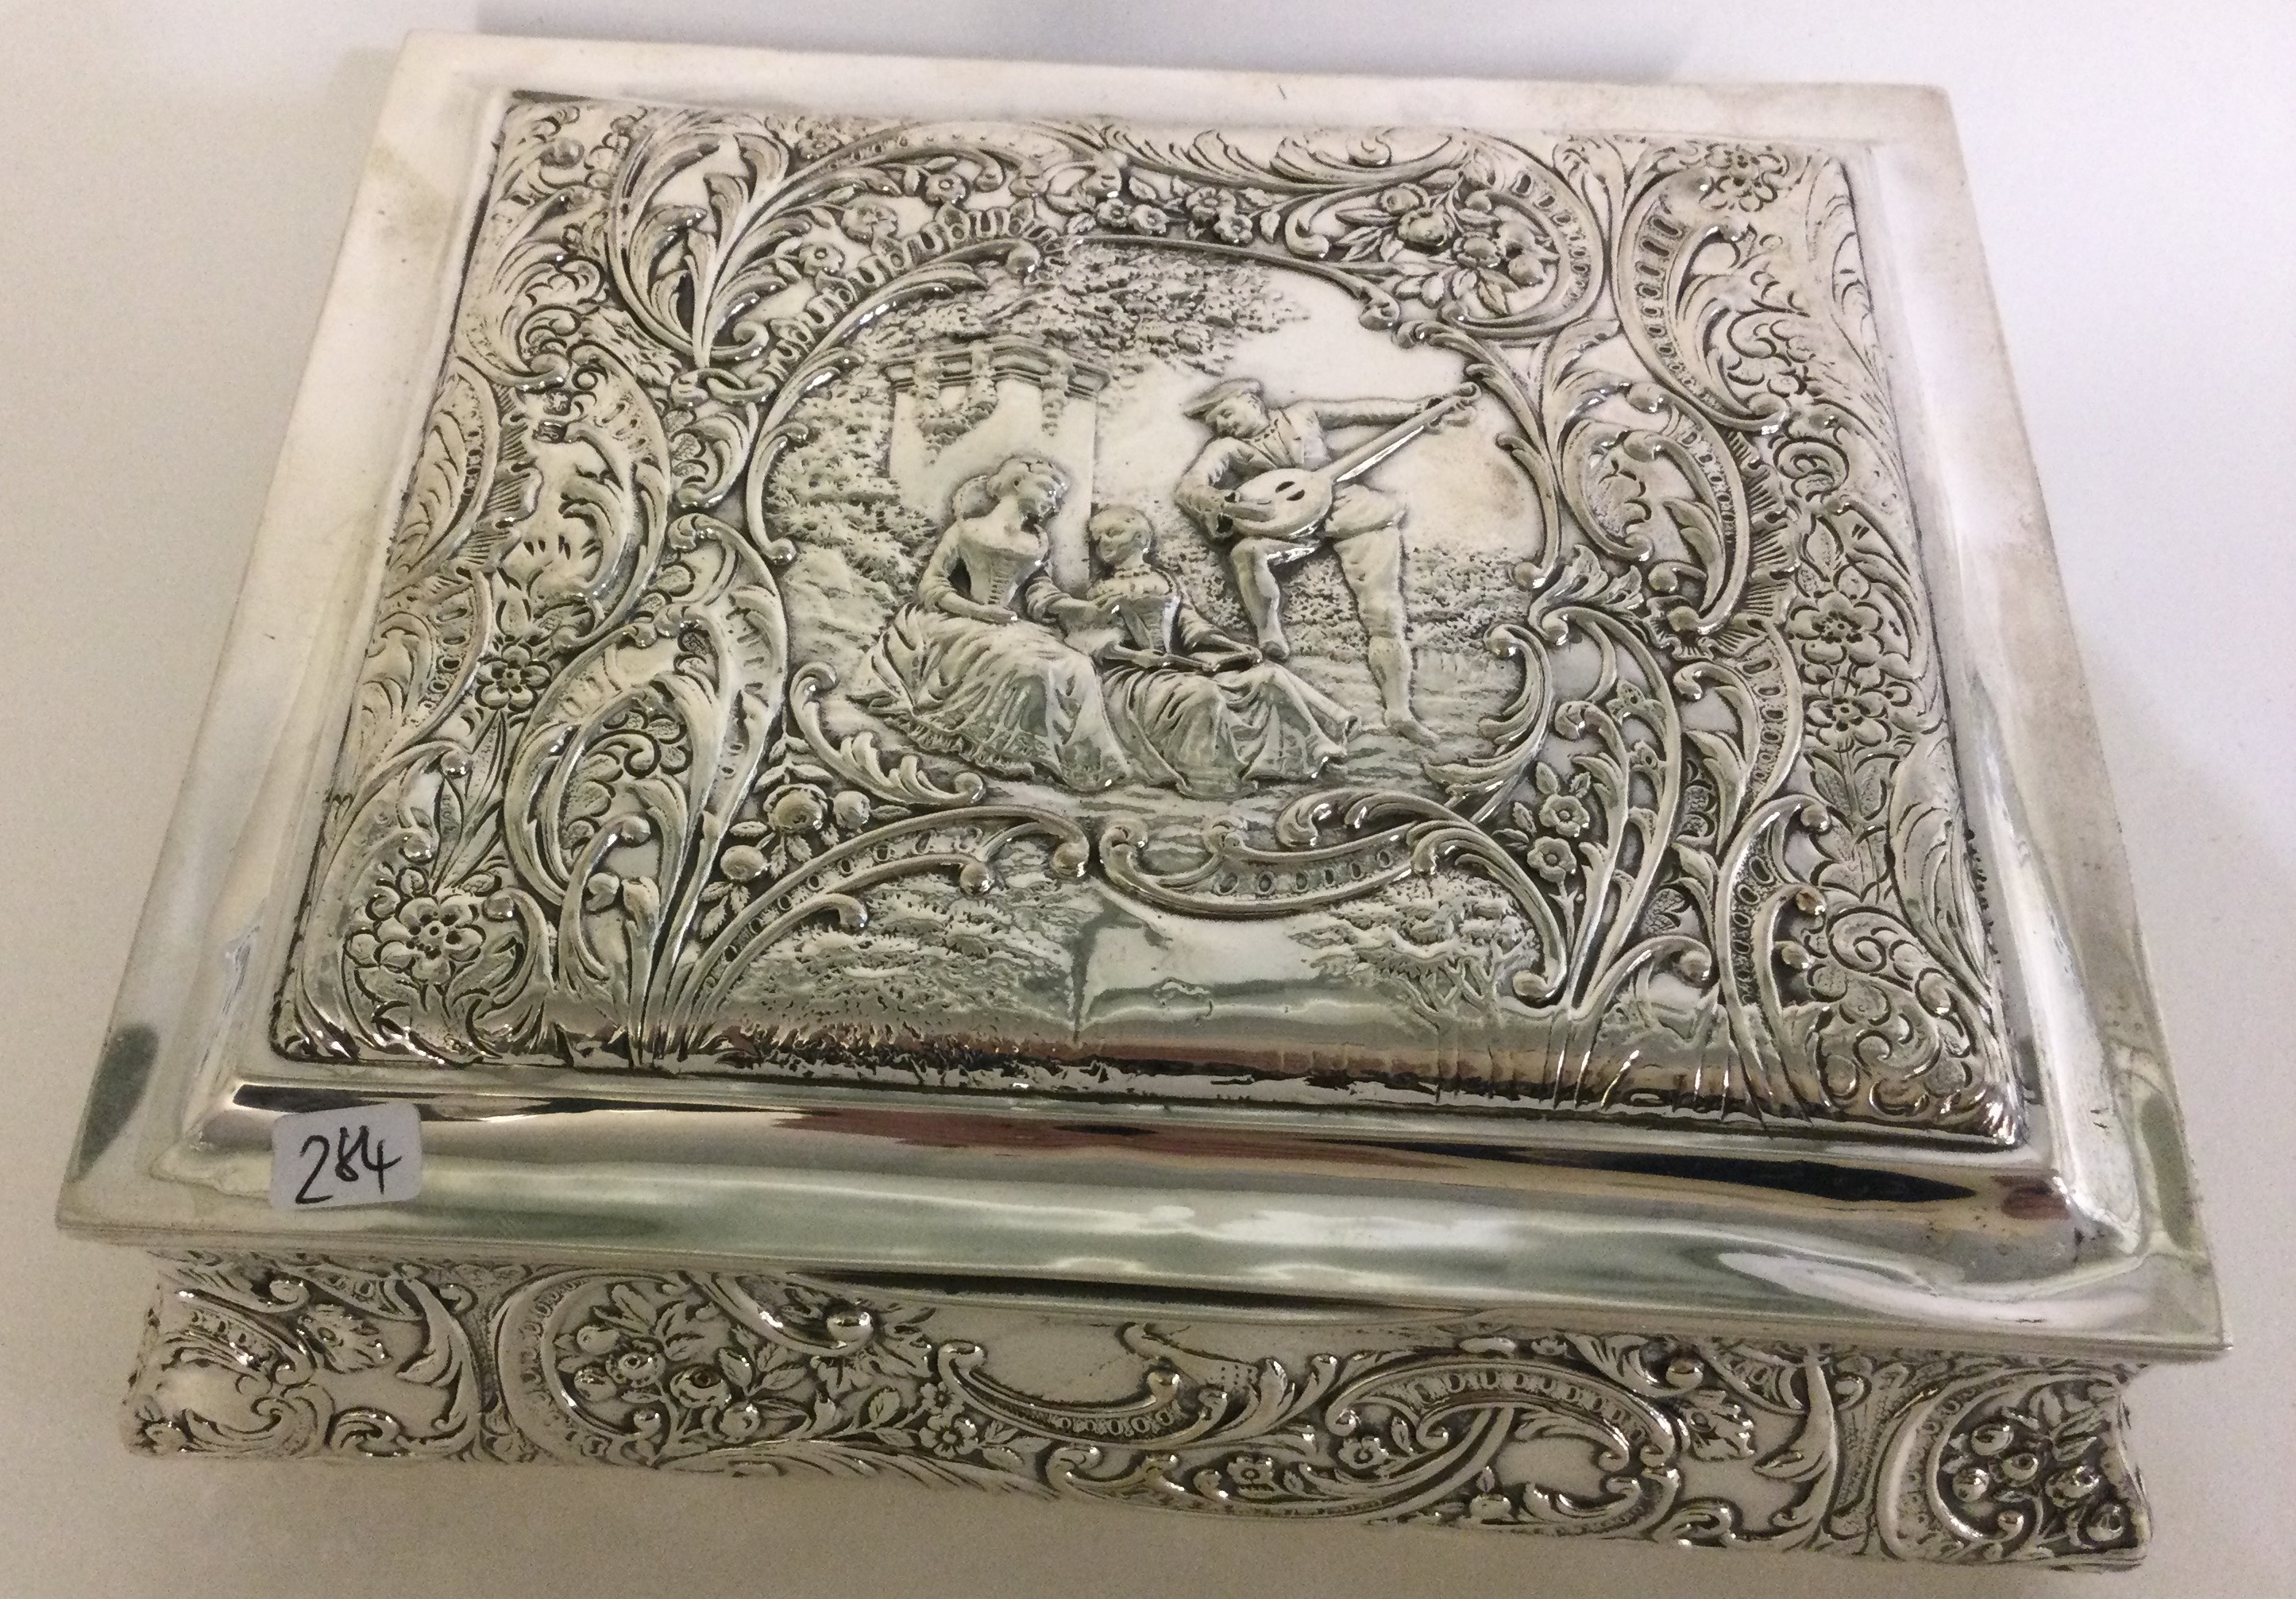 A large chased silver jewellery box with embossed decoration. - Image 2 of 3